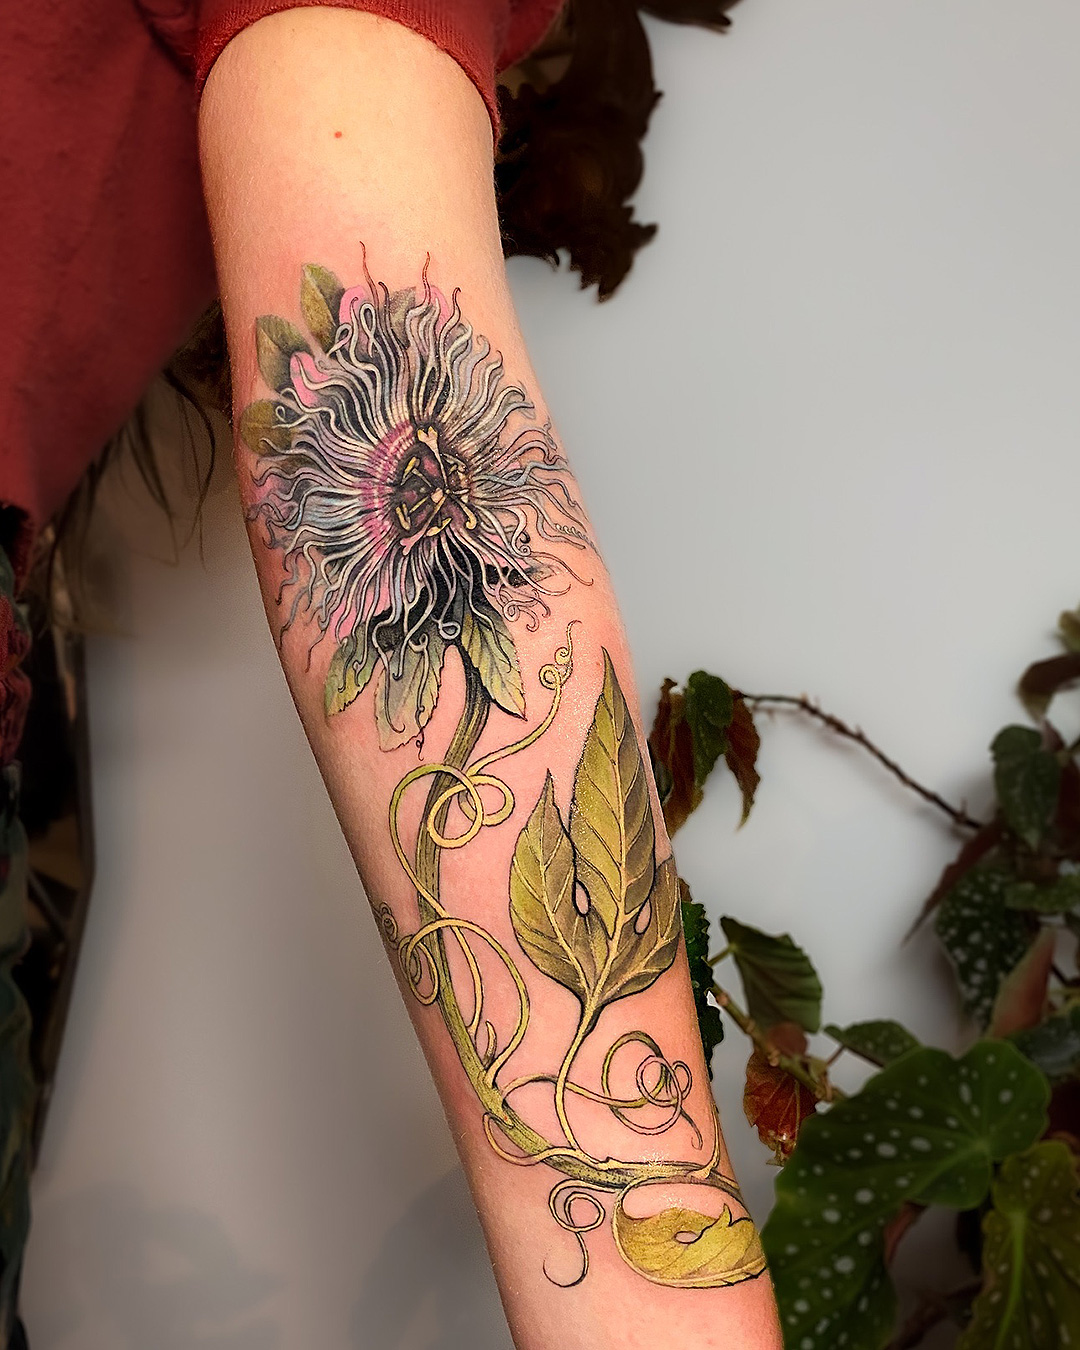 Someone with a trippy flower tattooed on their arm at Exium.